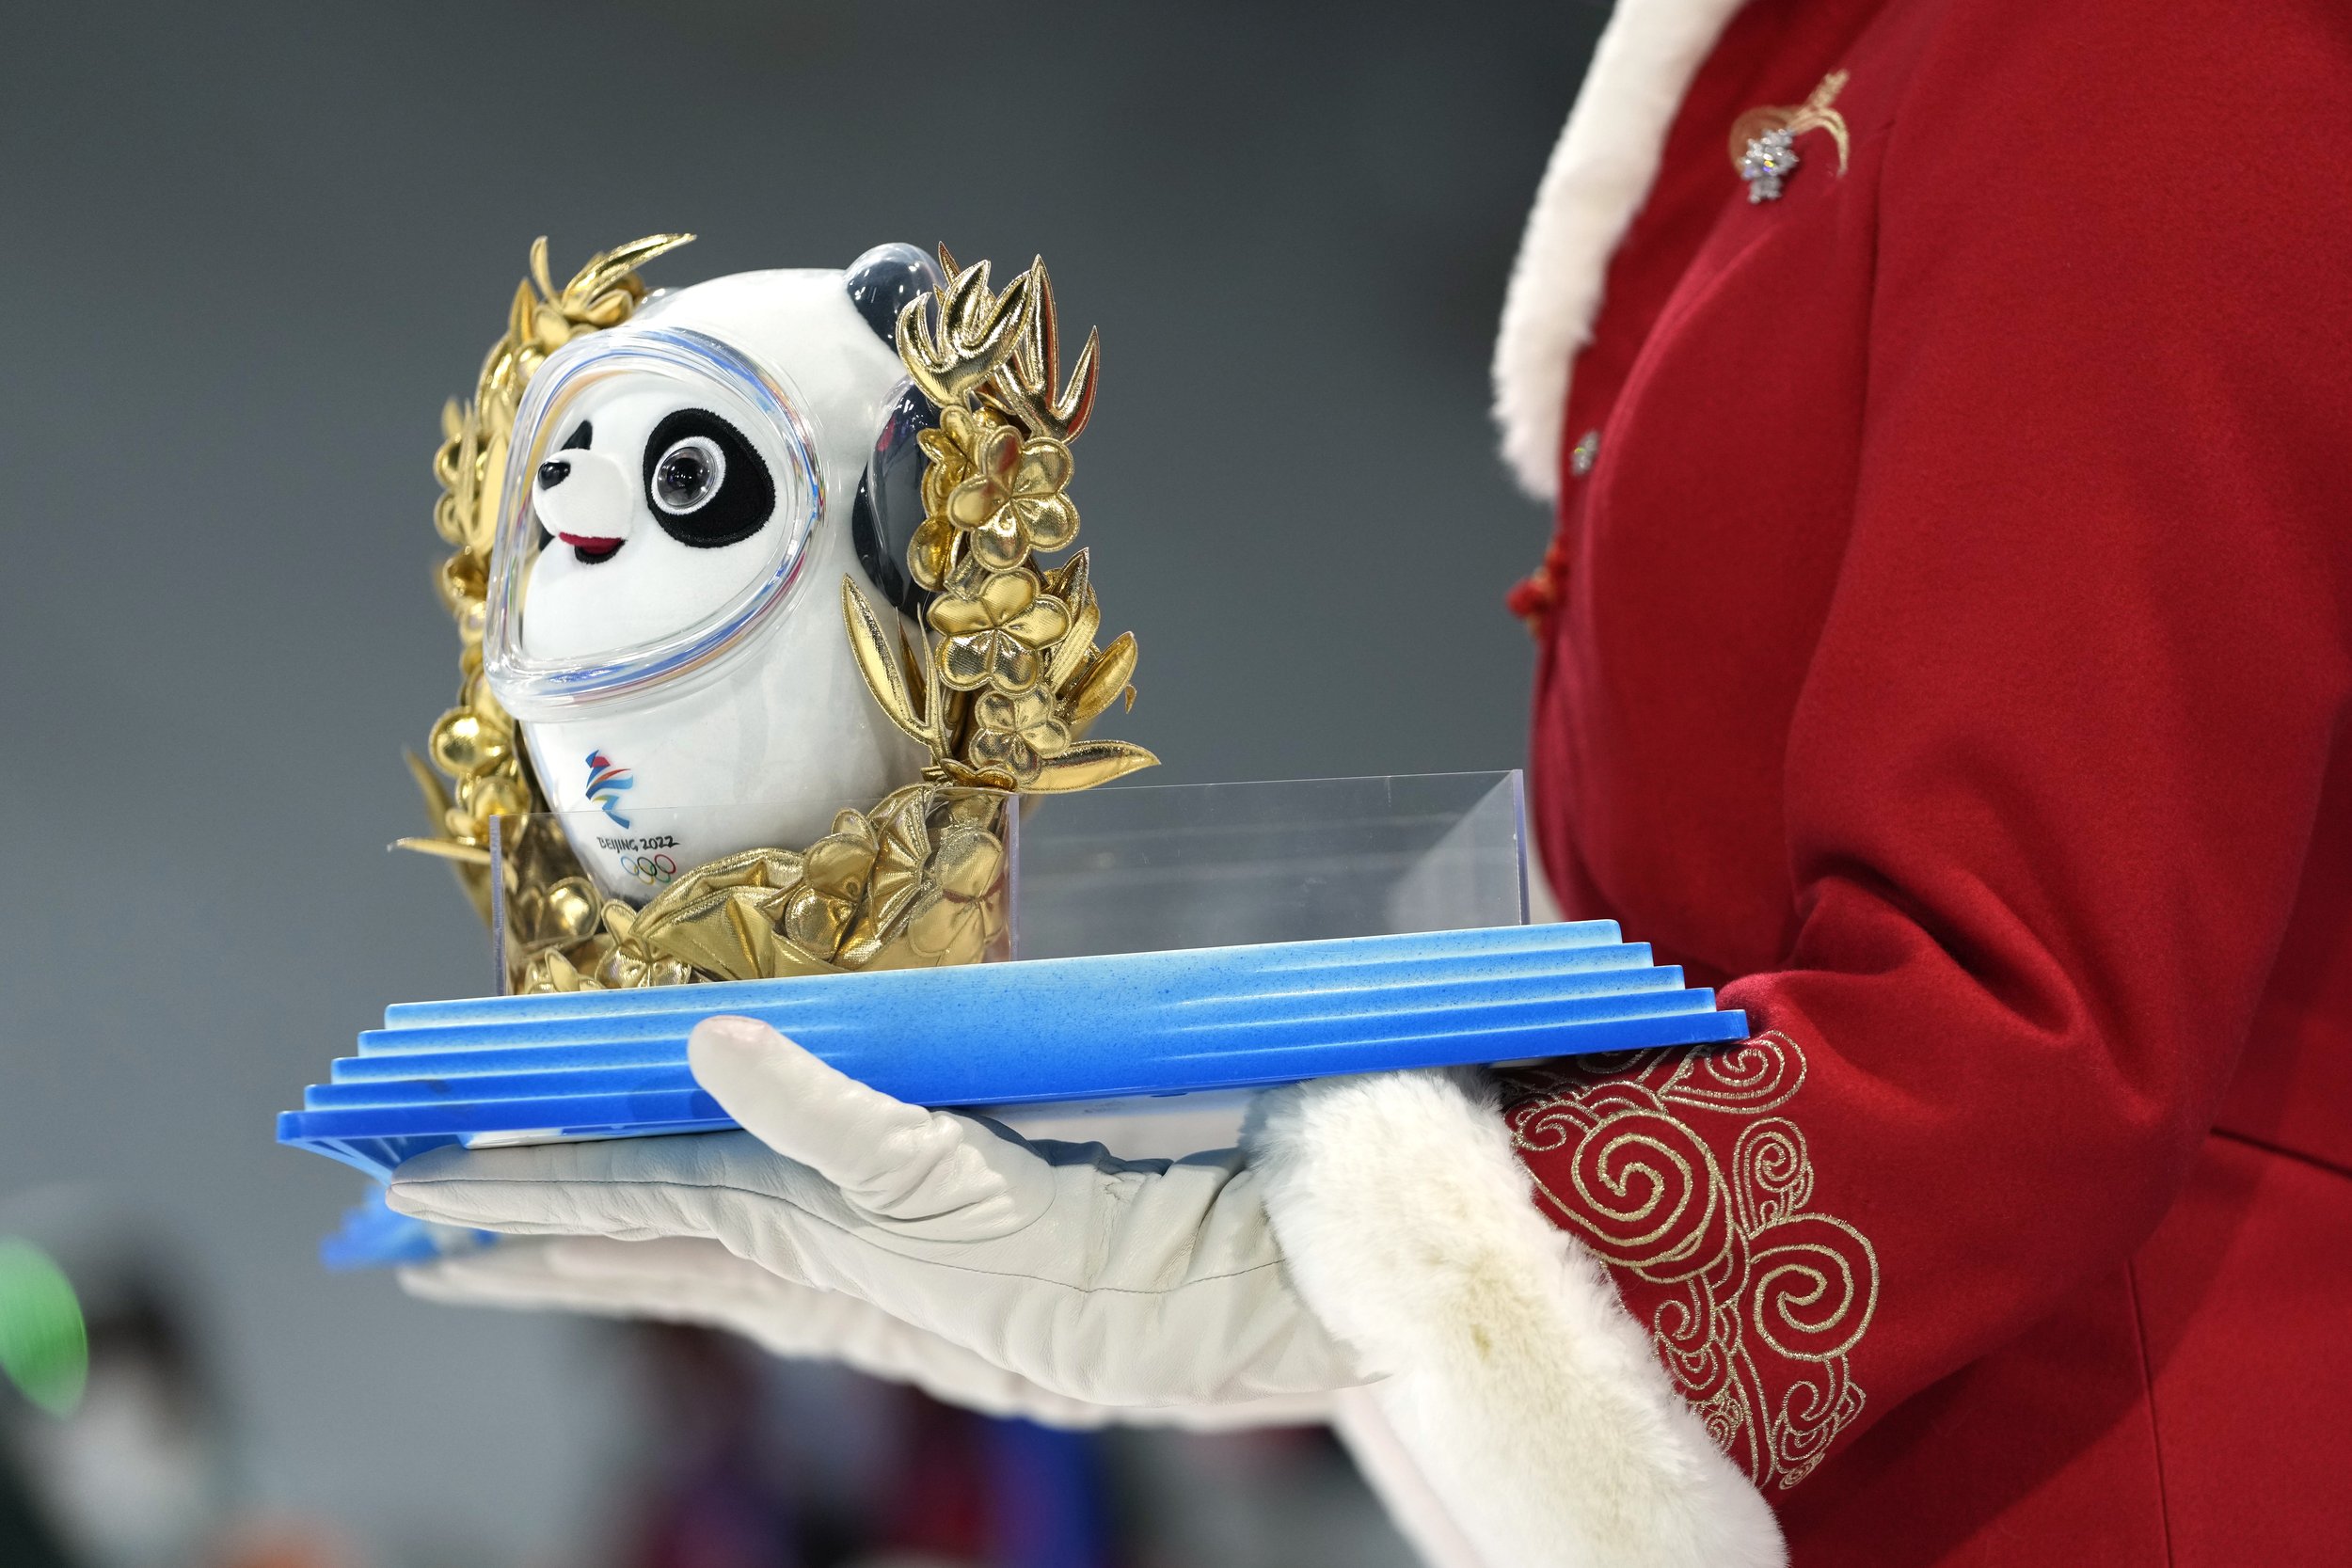  A mascot that is presented to the medal winners is displayed during the venue ceremony for the women's moguls at Genting Snow Park at the 2022 Winter Olympics, Sunday, Feb. 6, 2022, in Zhangjiakou, China. (AP Photo/Francisco Seco) 